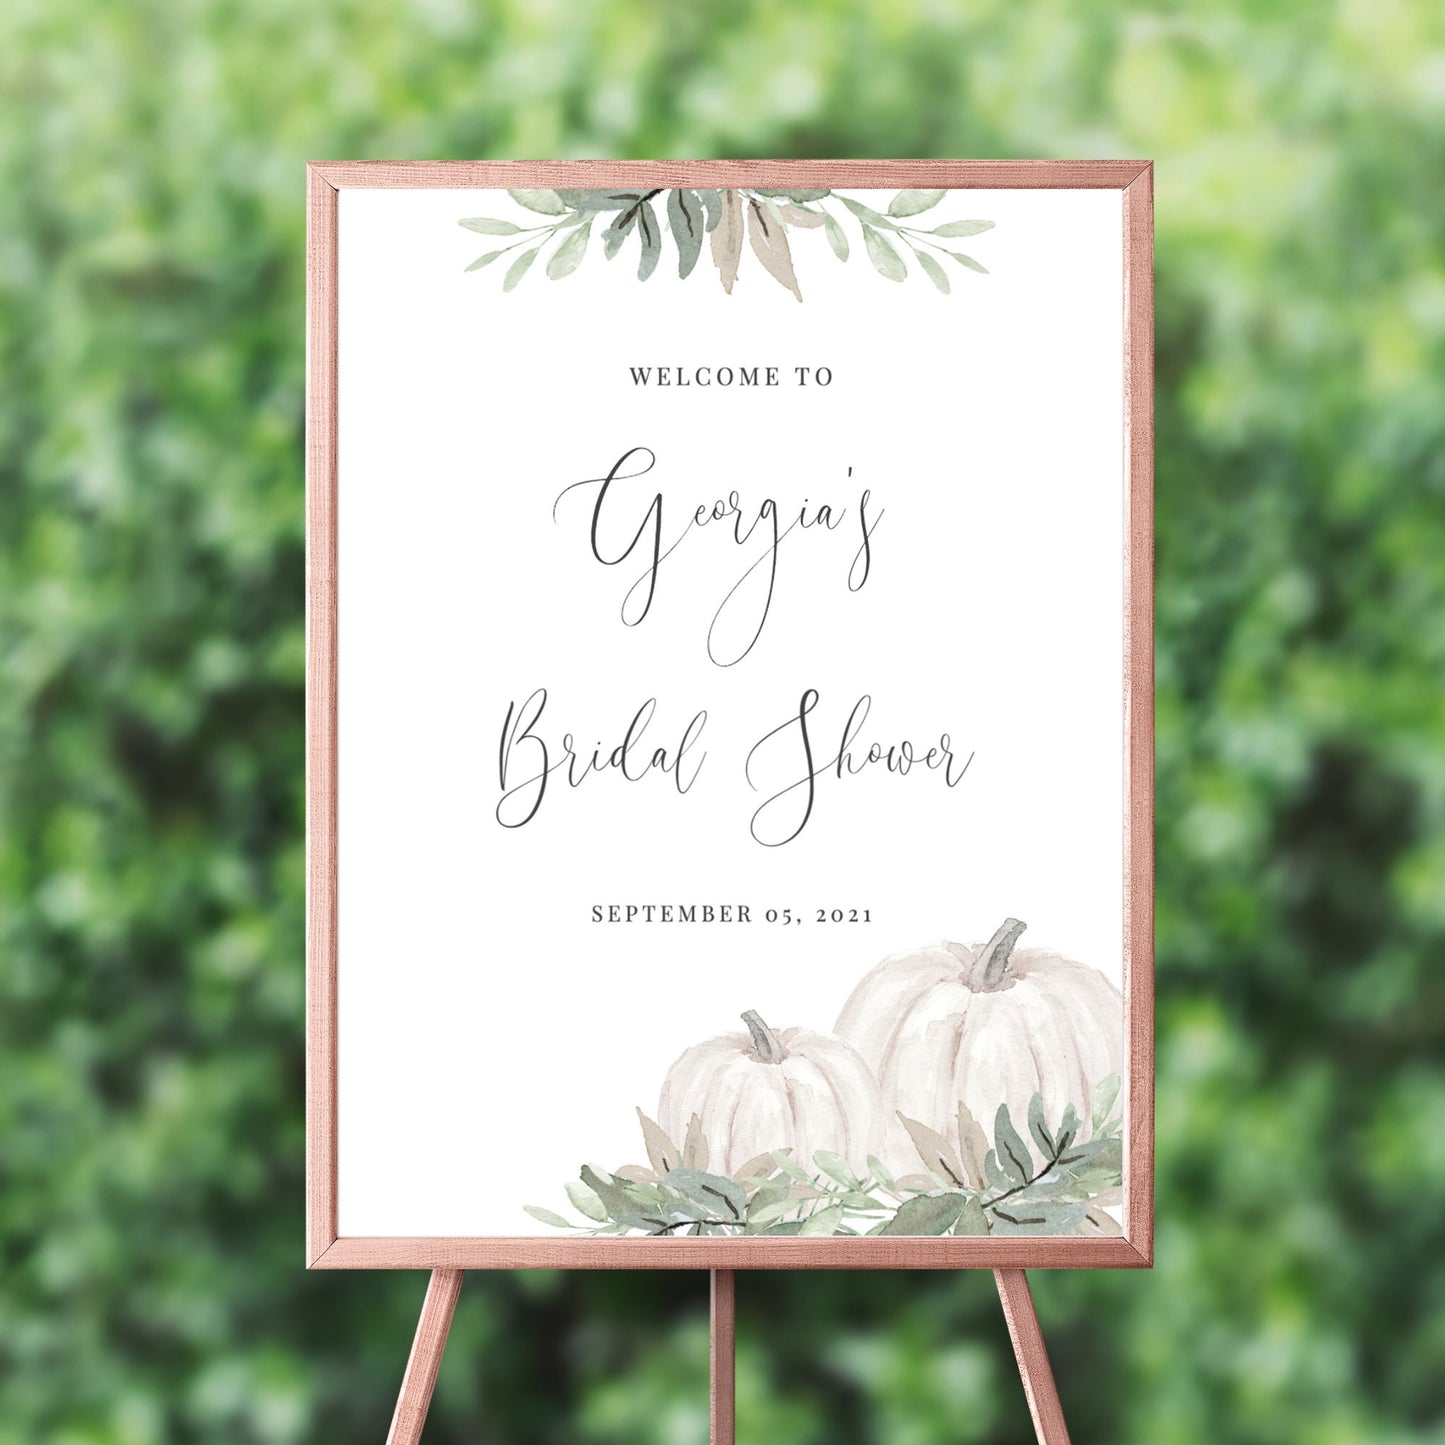 Editable Bridal Shower Welcome Sign Bridal Shower Welcome Poster Sage Green and White Fall Pumpkin Template